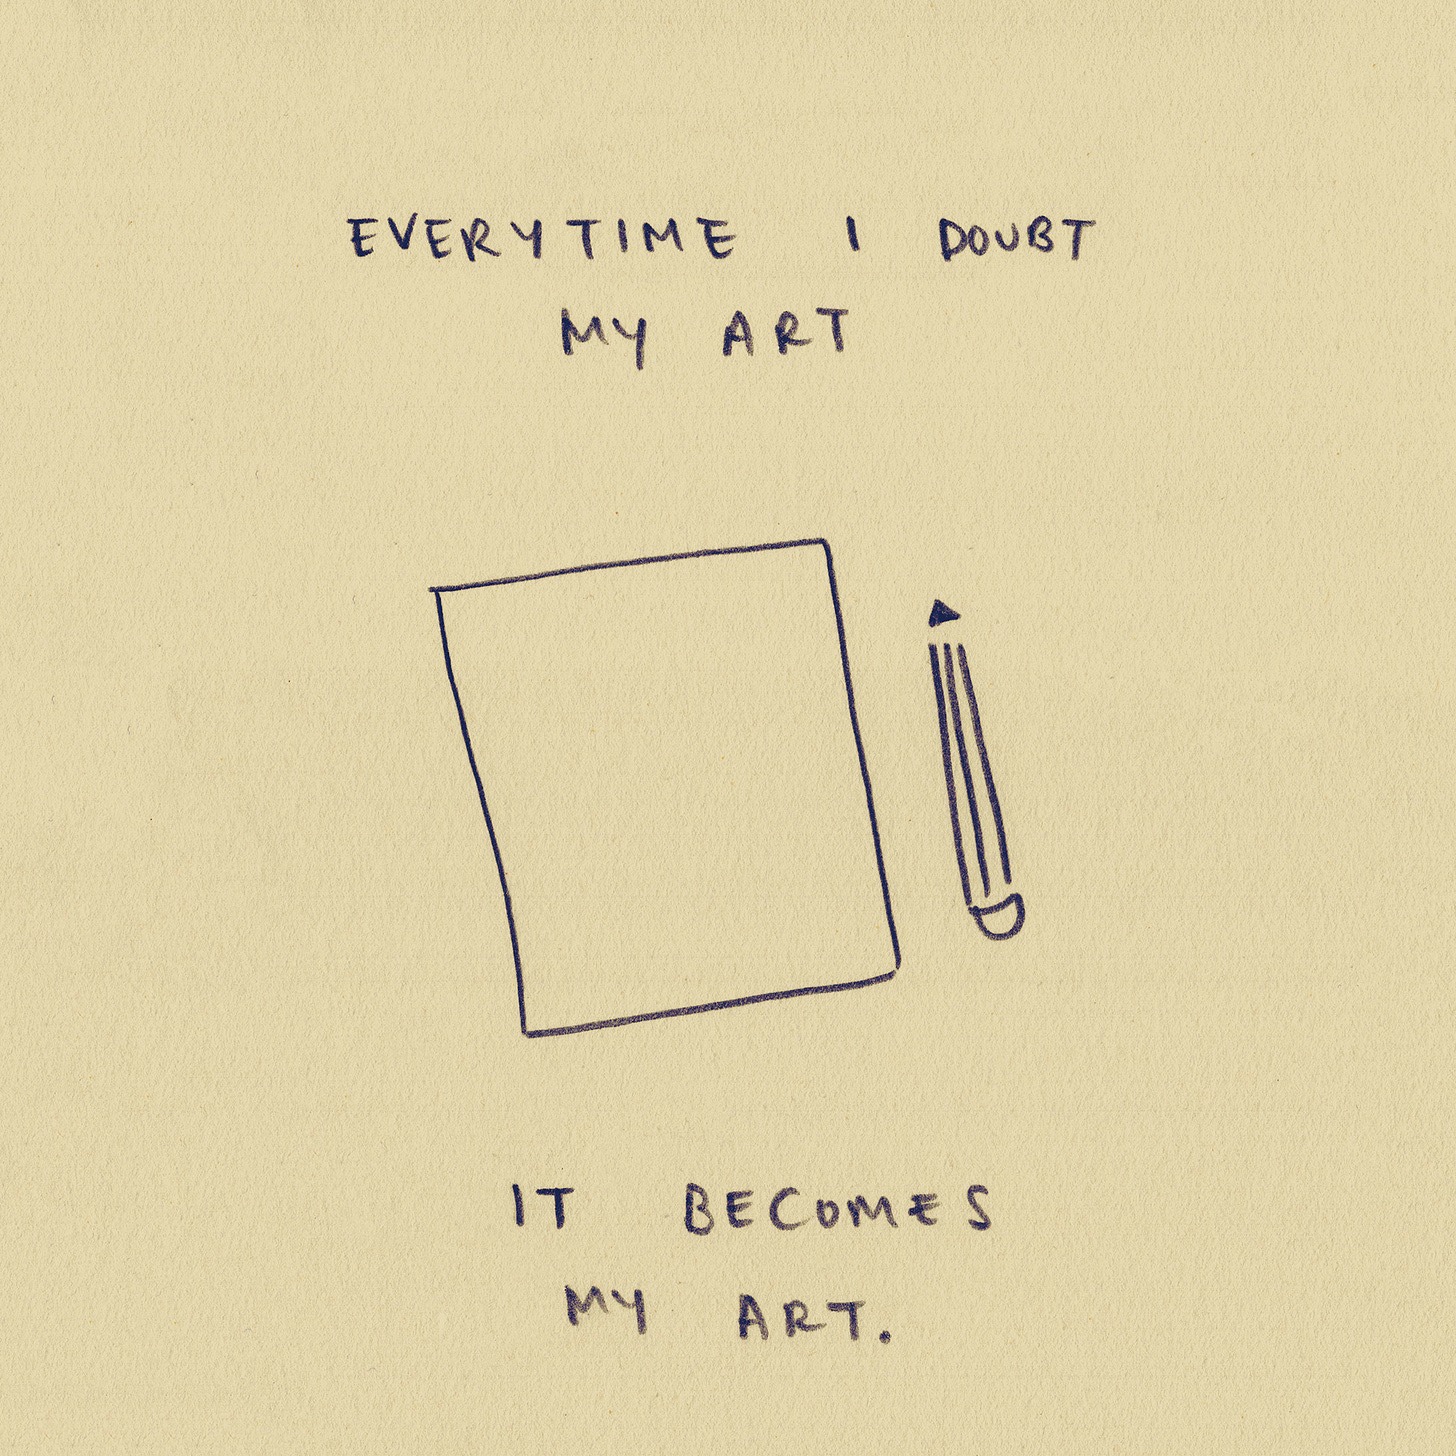 Everytime I doubt my art it becomes my art. Pictured with a blank piece of paper and pencil.